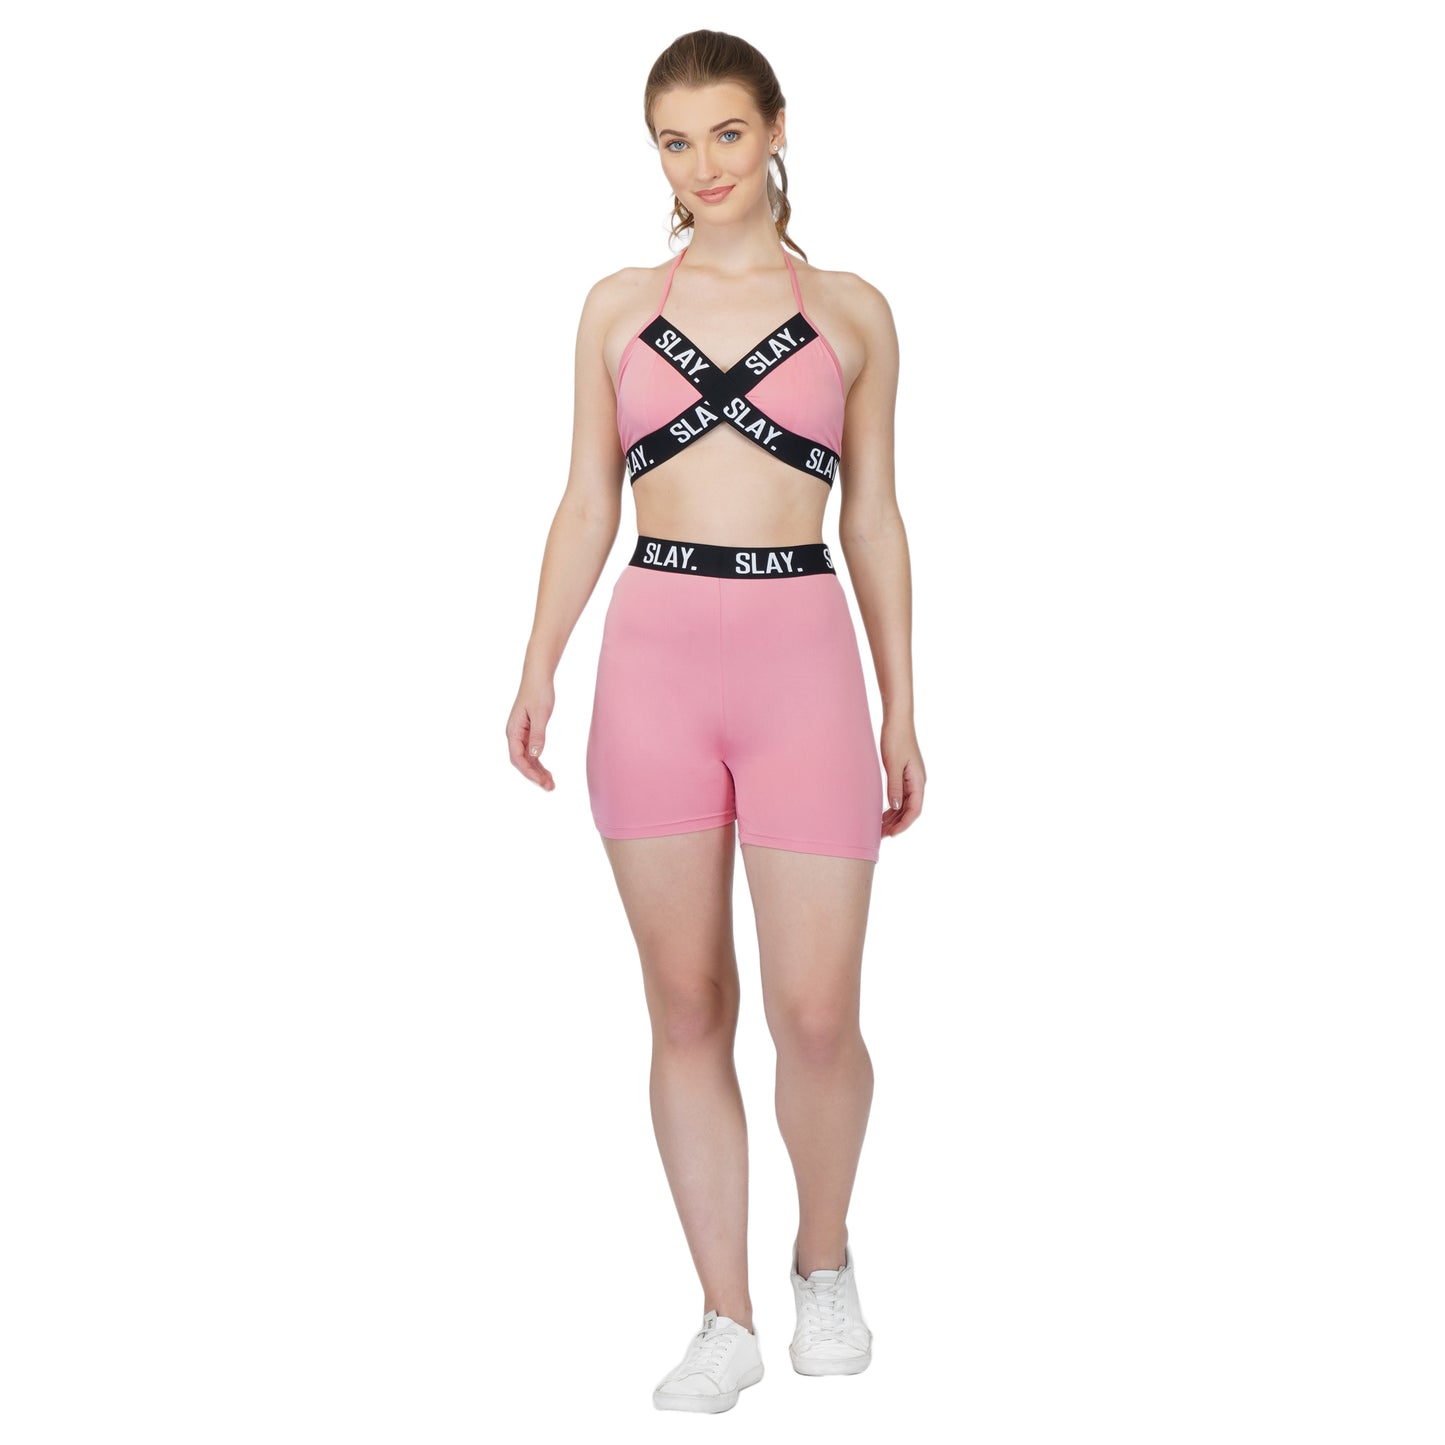 SLAY. Women's Pink Activewear Backless Sports Bra And High waist Shorts Co-ord Set